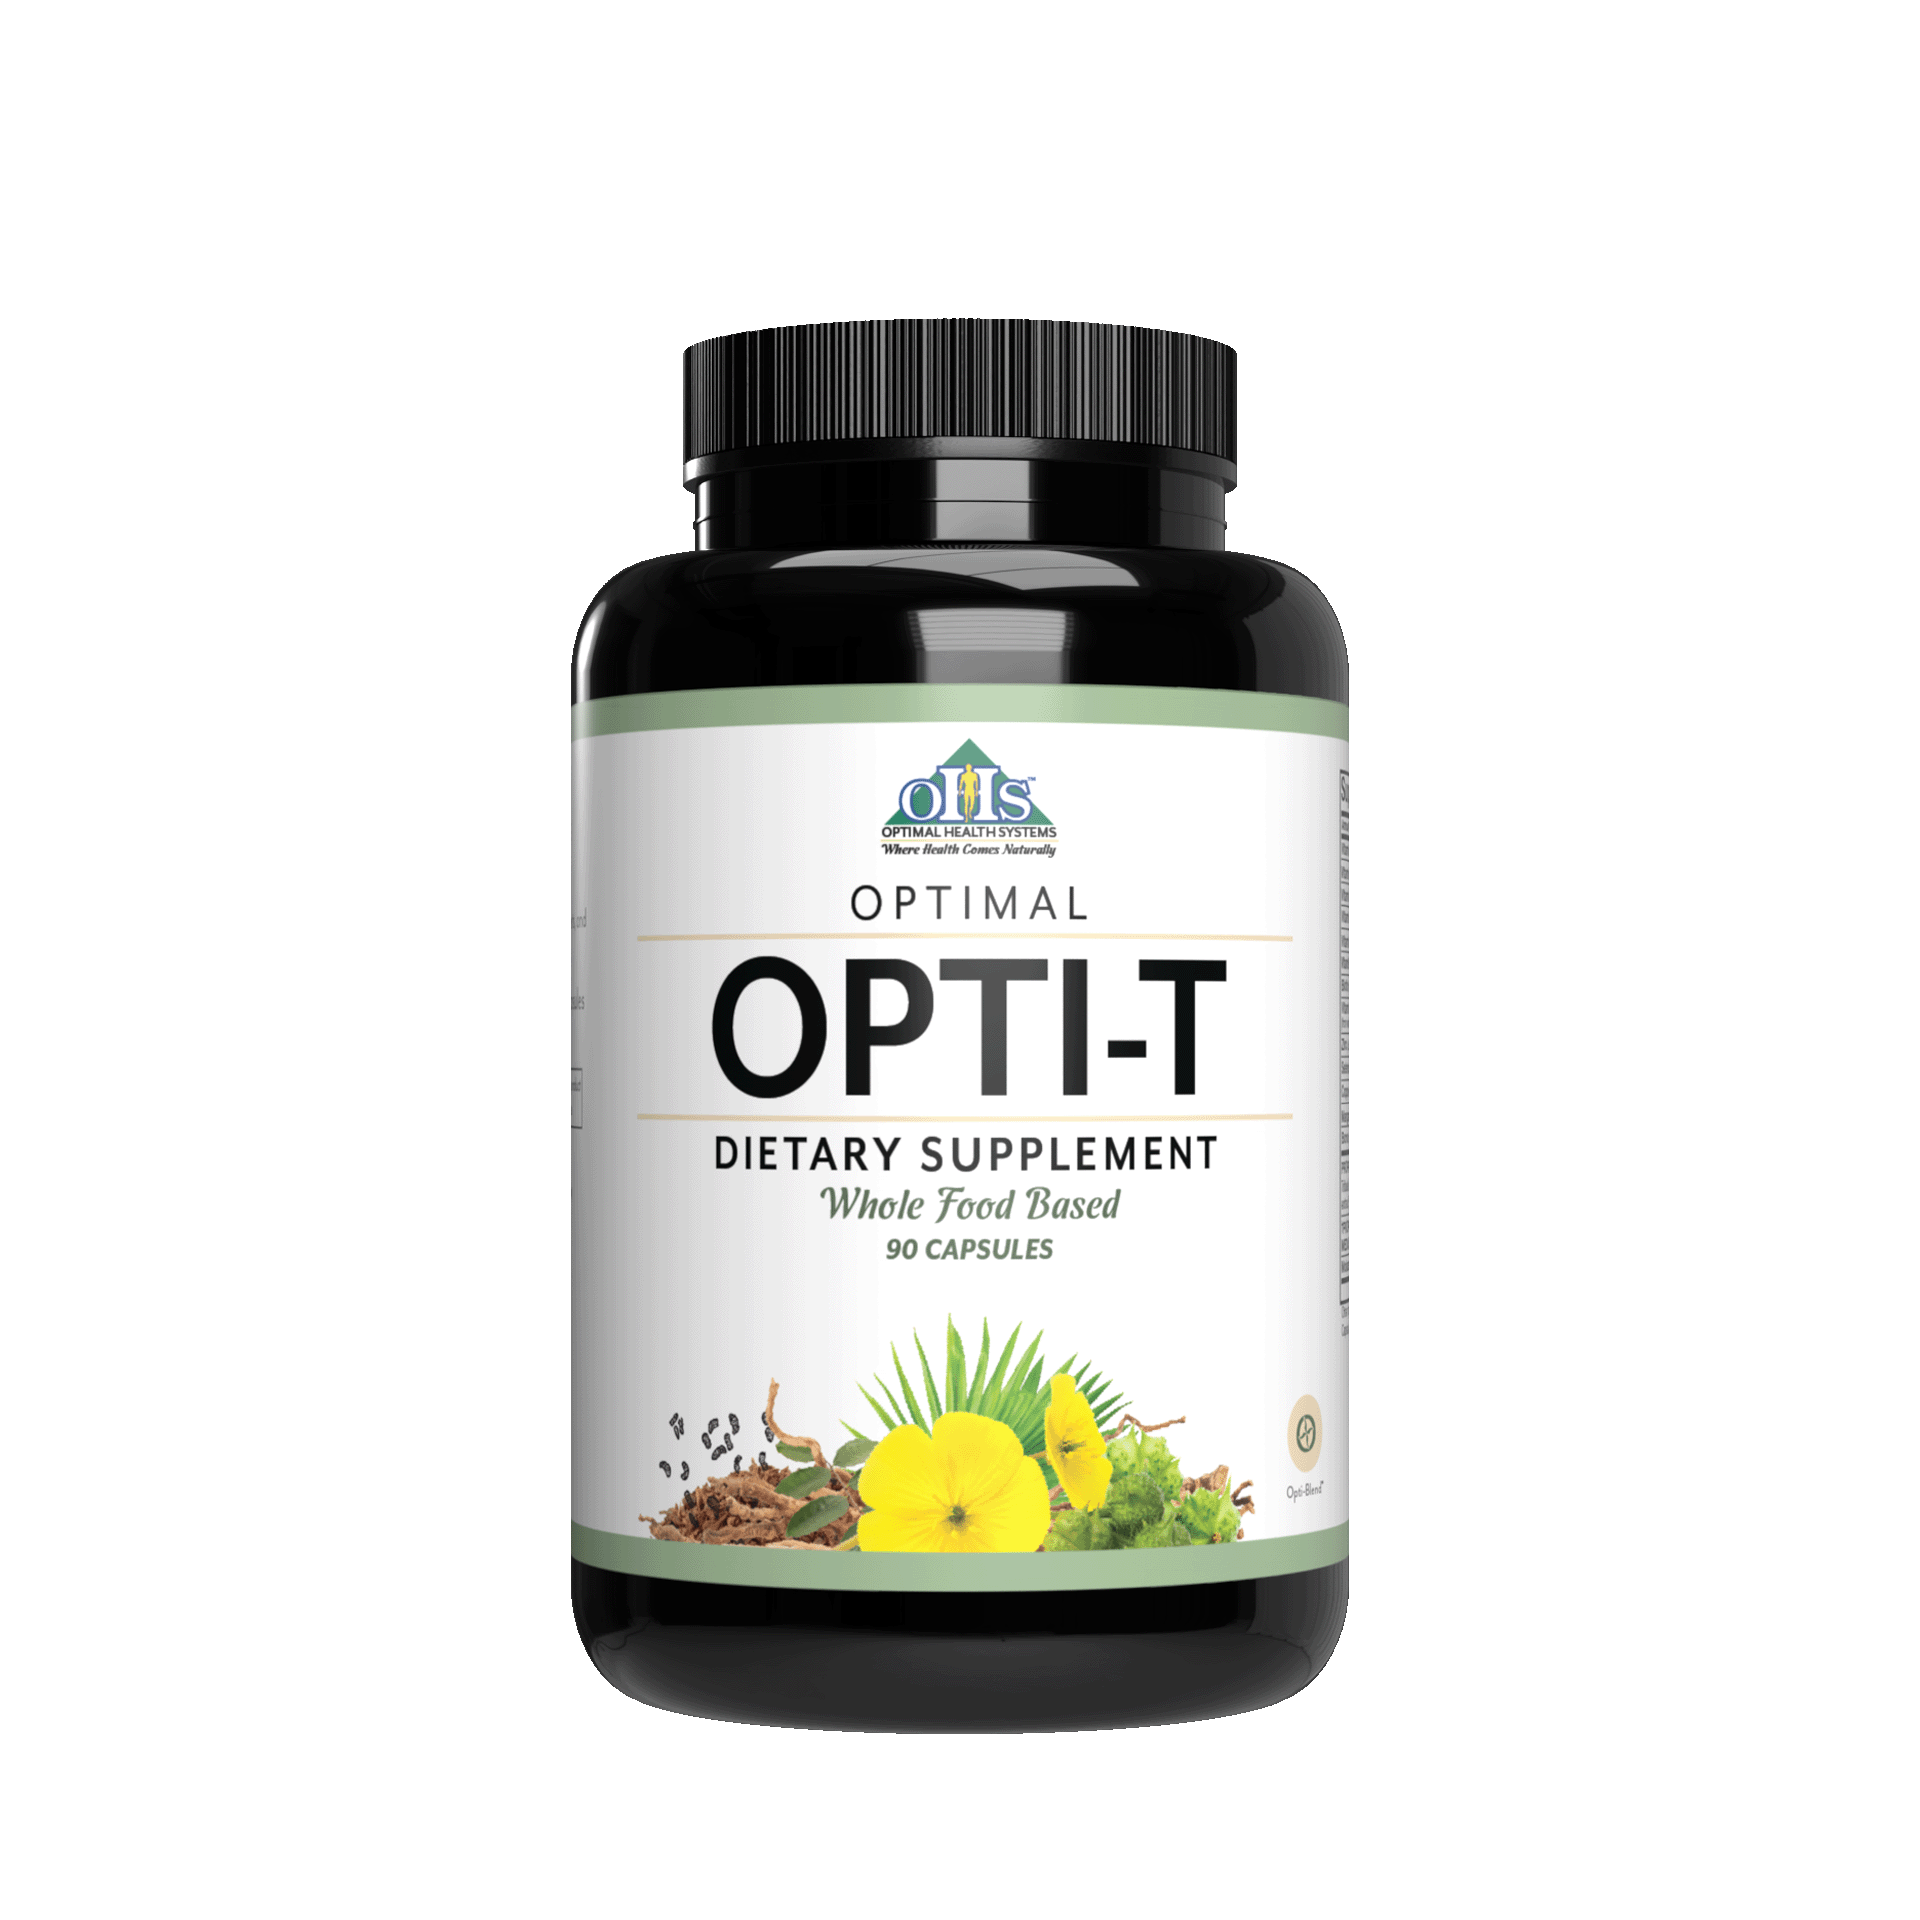 Image of a bottle of Optimal Opti-T.